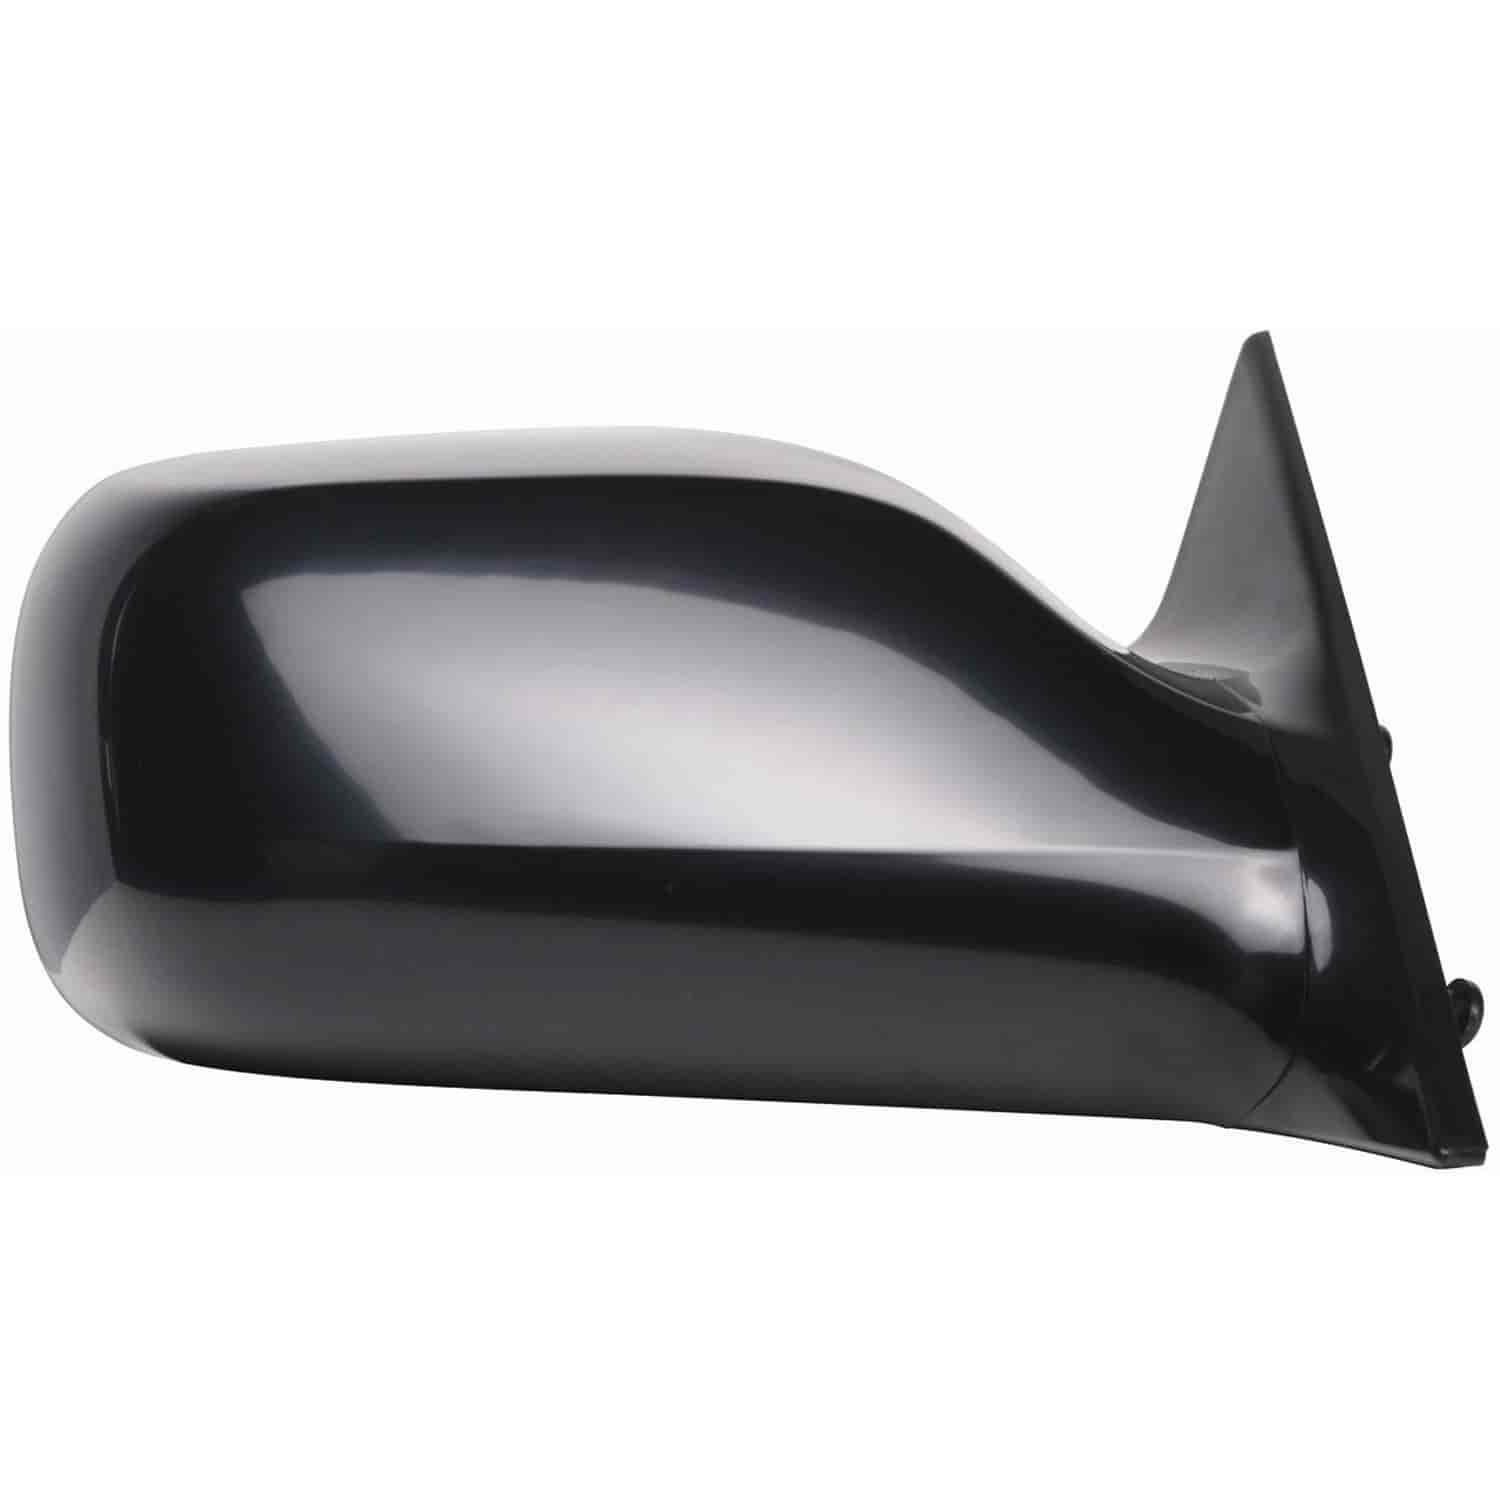 OEM Style Replacement mirror for 05-10 Toyota Avalon Limited XLS Model H passenger side mirror teste